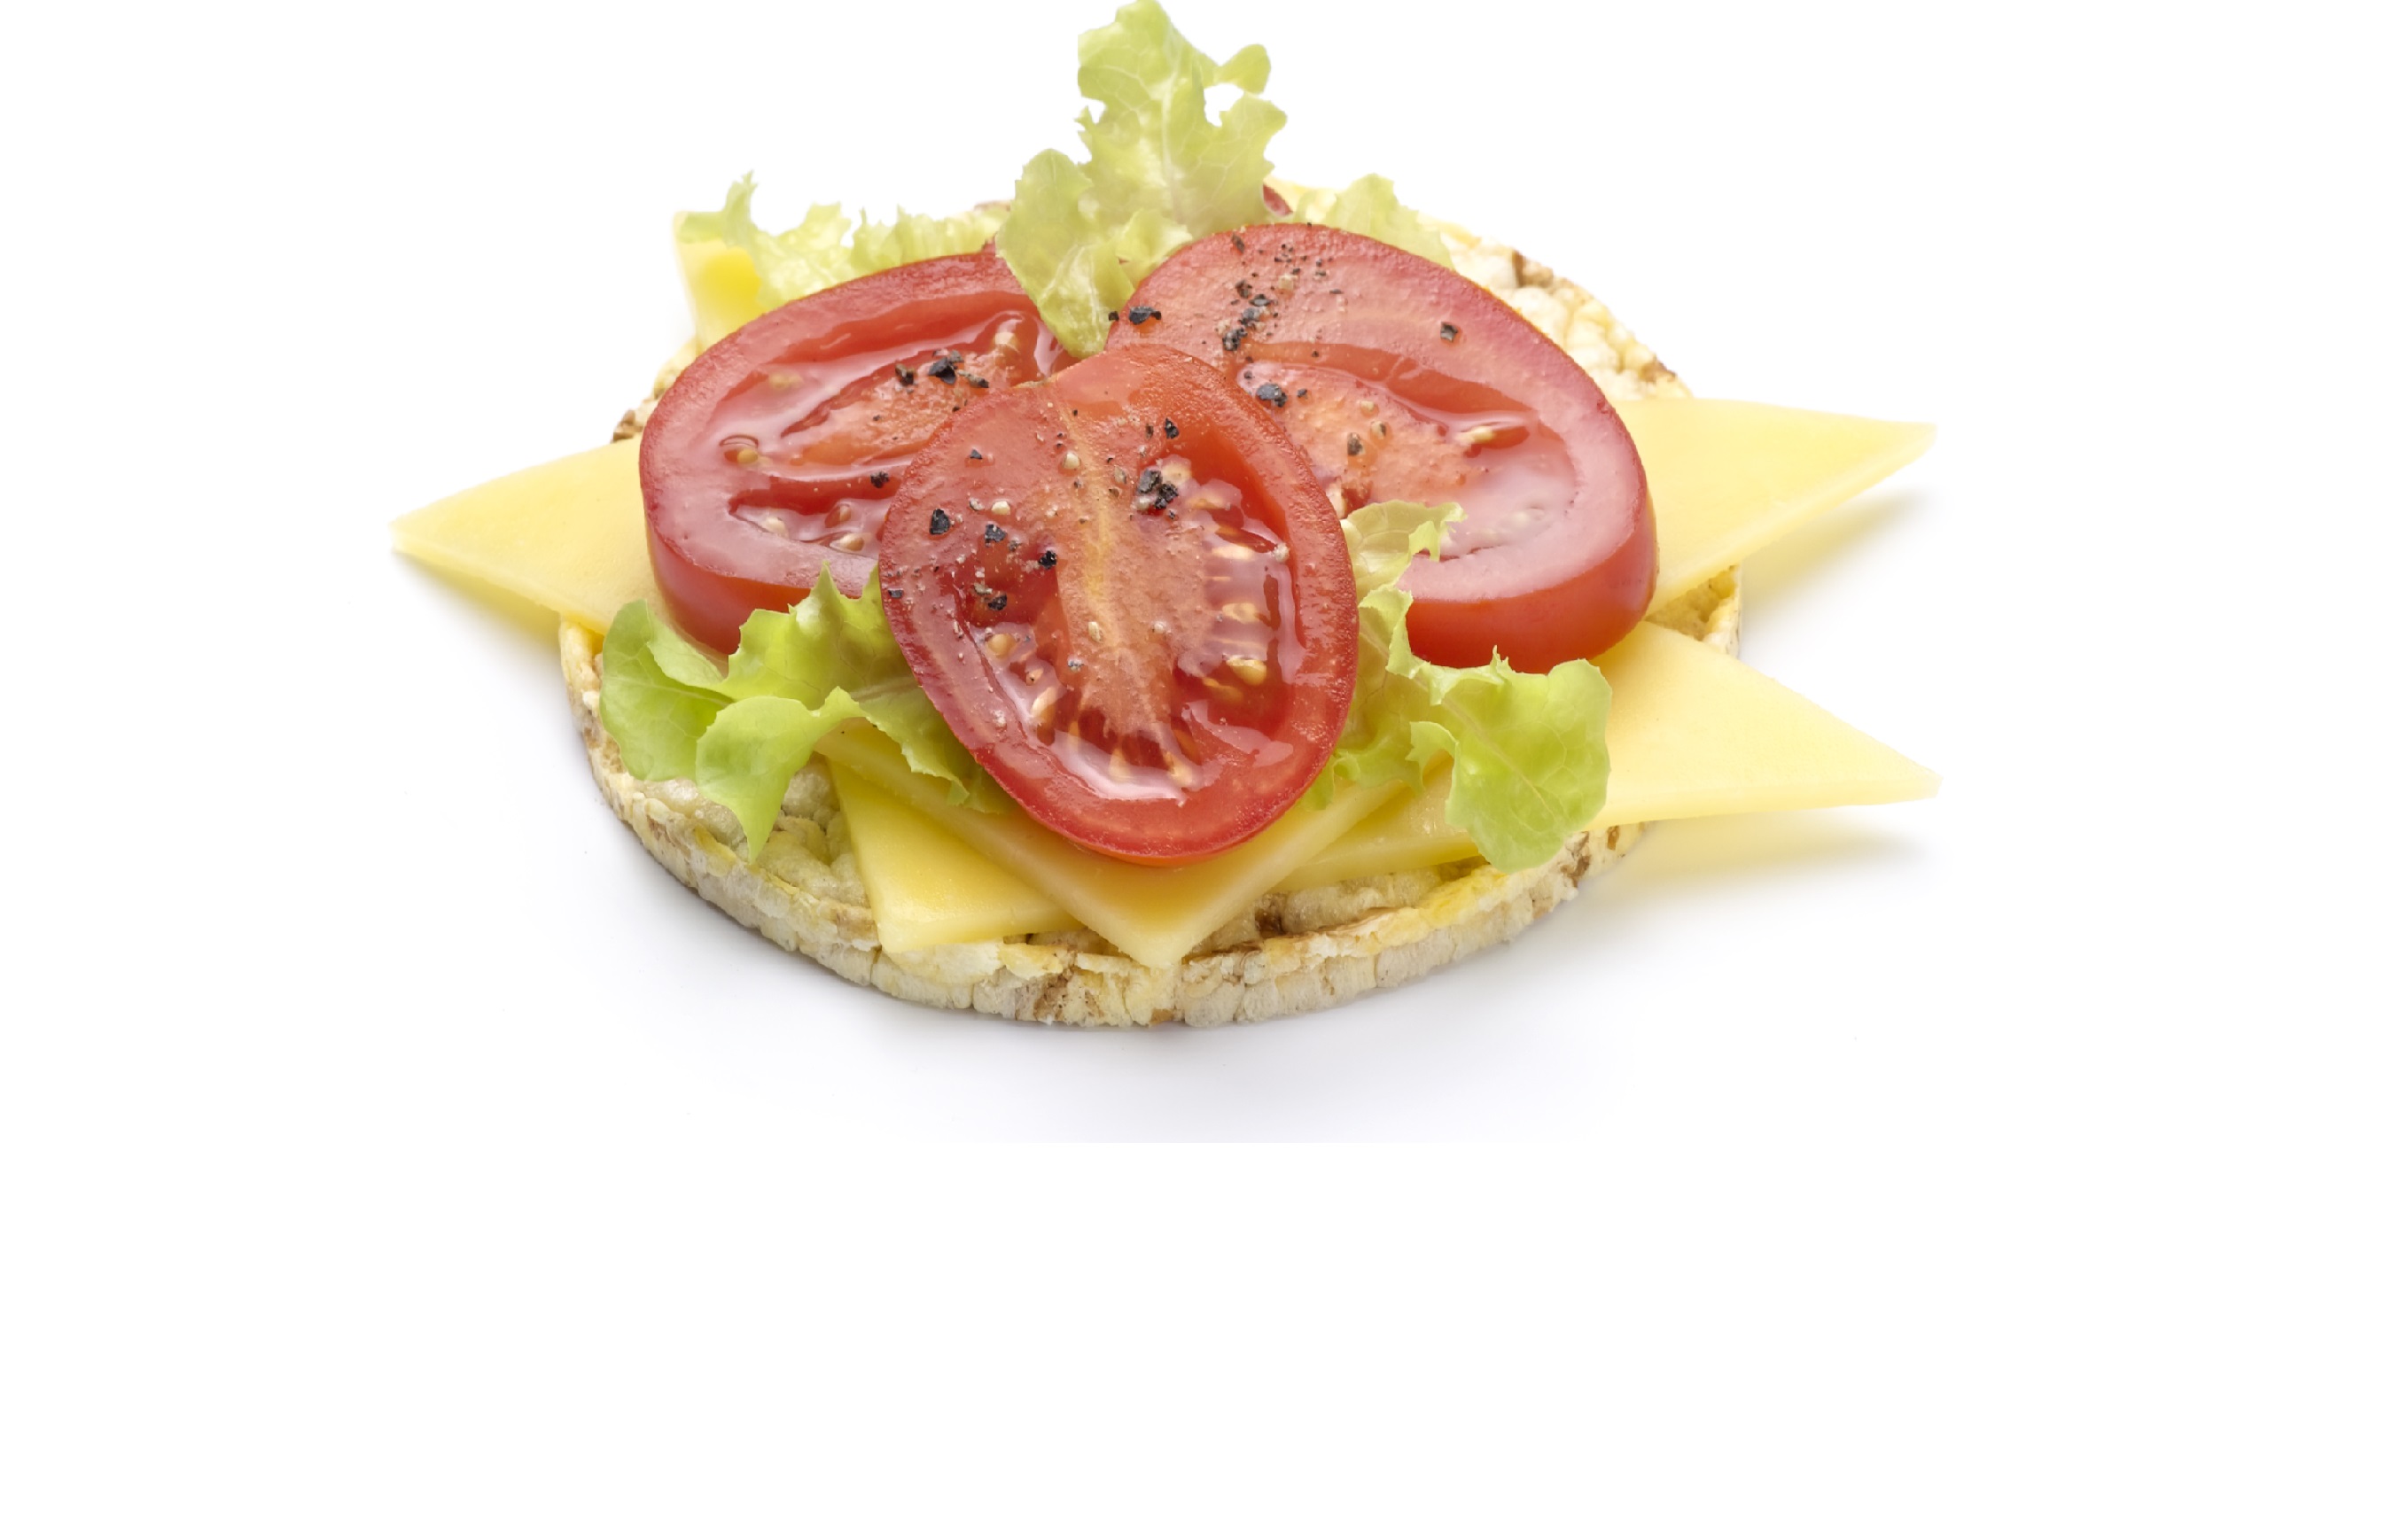 Quick snack option of tomato, cheese & lettuce on Corn Thins slices